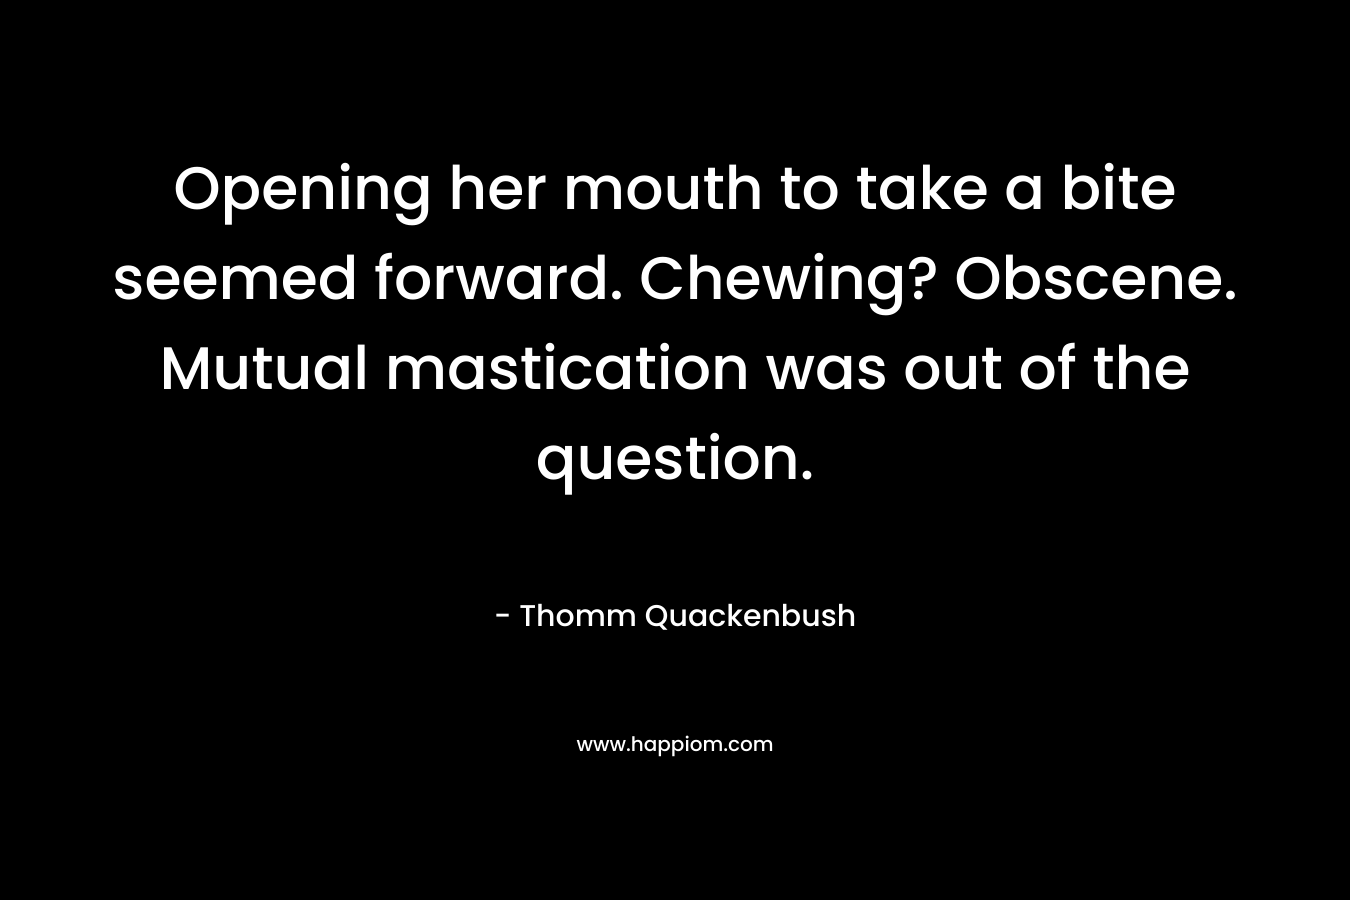 Opening her mouth to take a bite seemed forward. Chewing? Obscene. Mutual mastication was out of the question. – Thomm Quackenbush